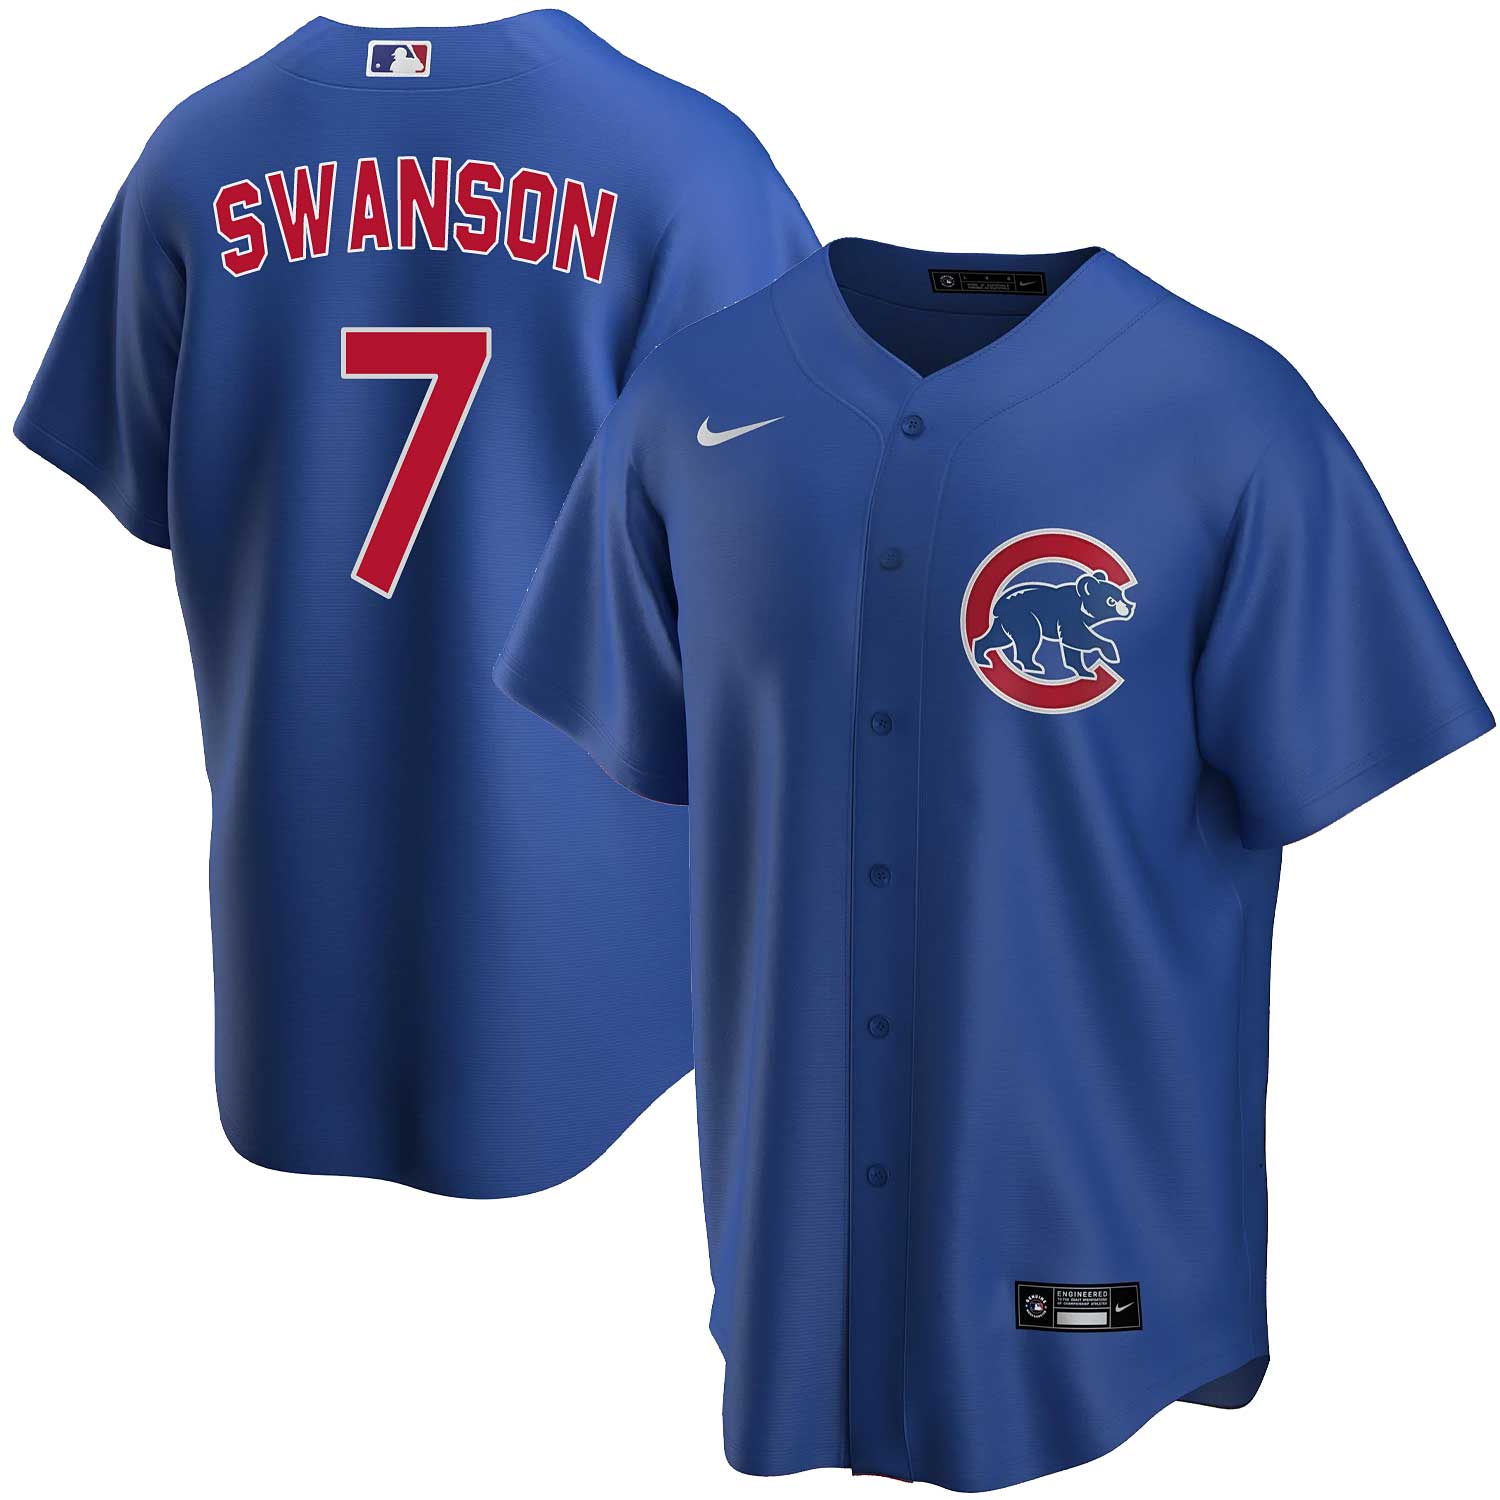 Chicago Cubs Nike Dansby Swanson Alernate Replica Jersey with Authentic Lettering Medium